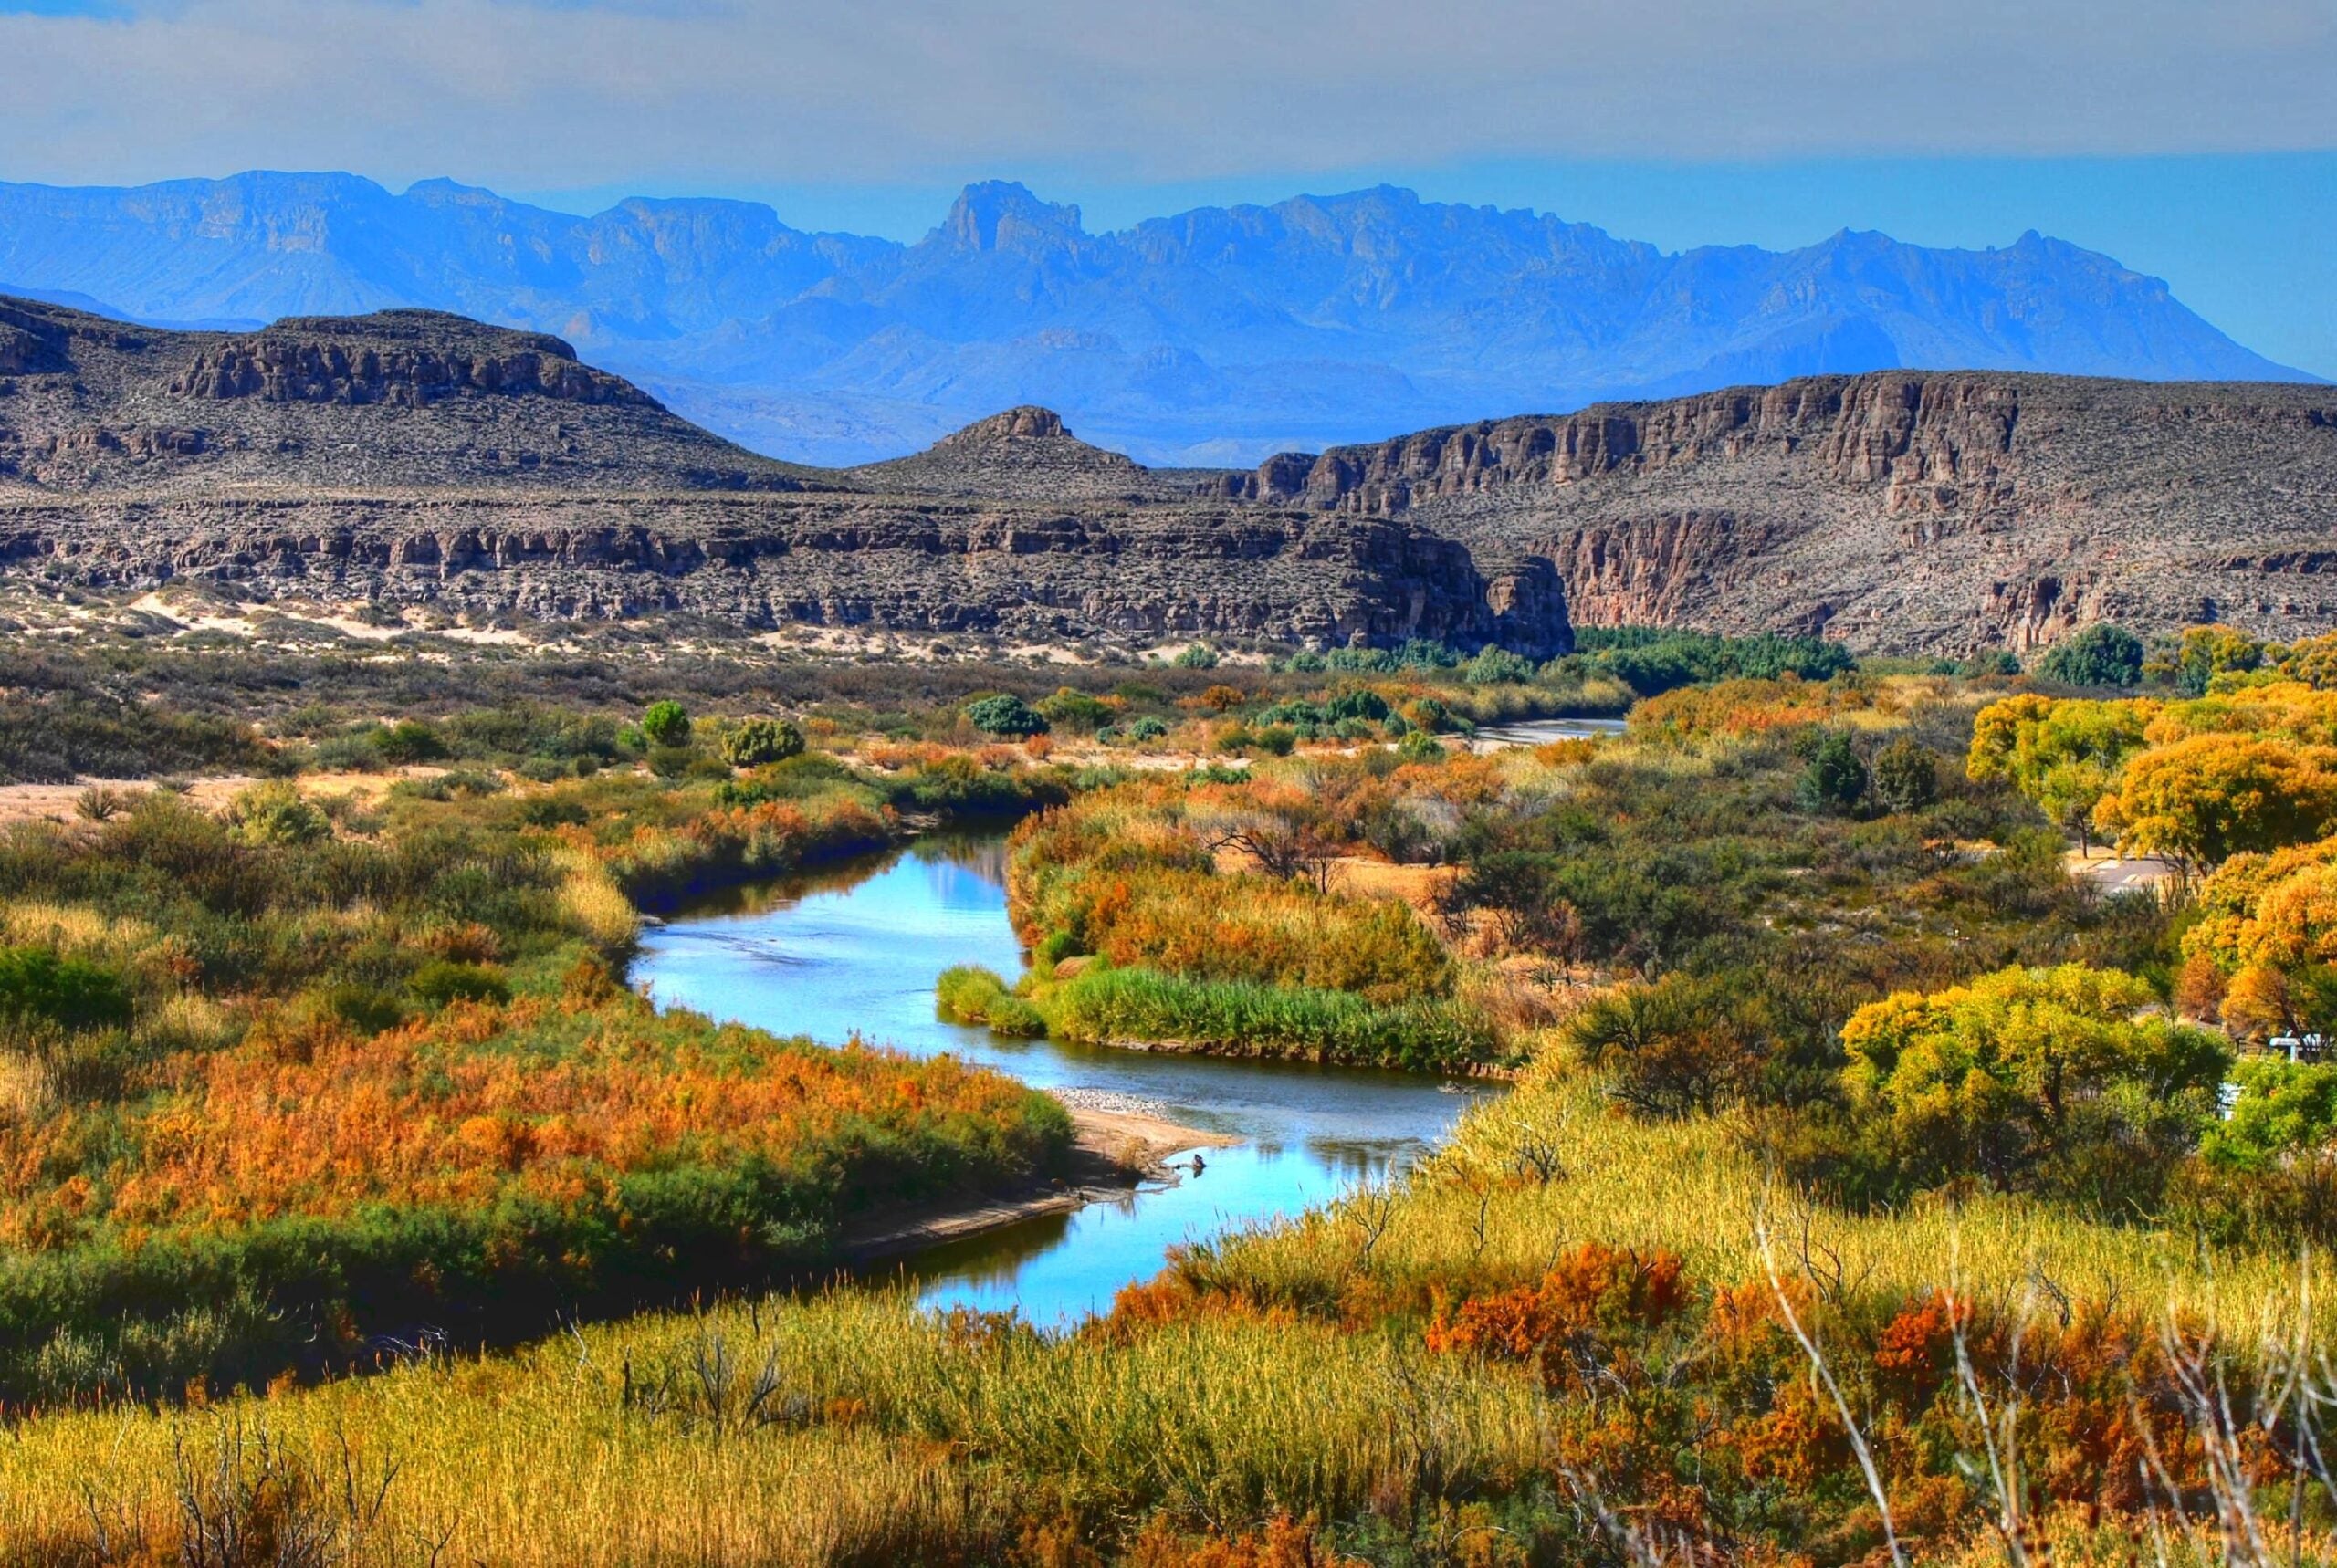 A beginners guide to visiting Big Bend National Park: Everything you need to know, see and do